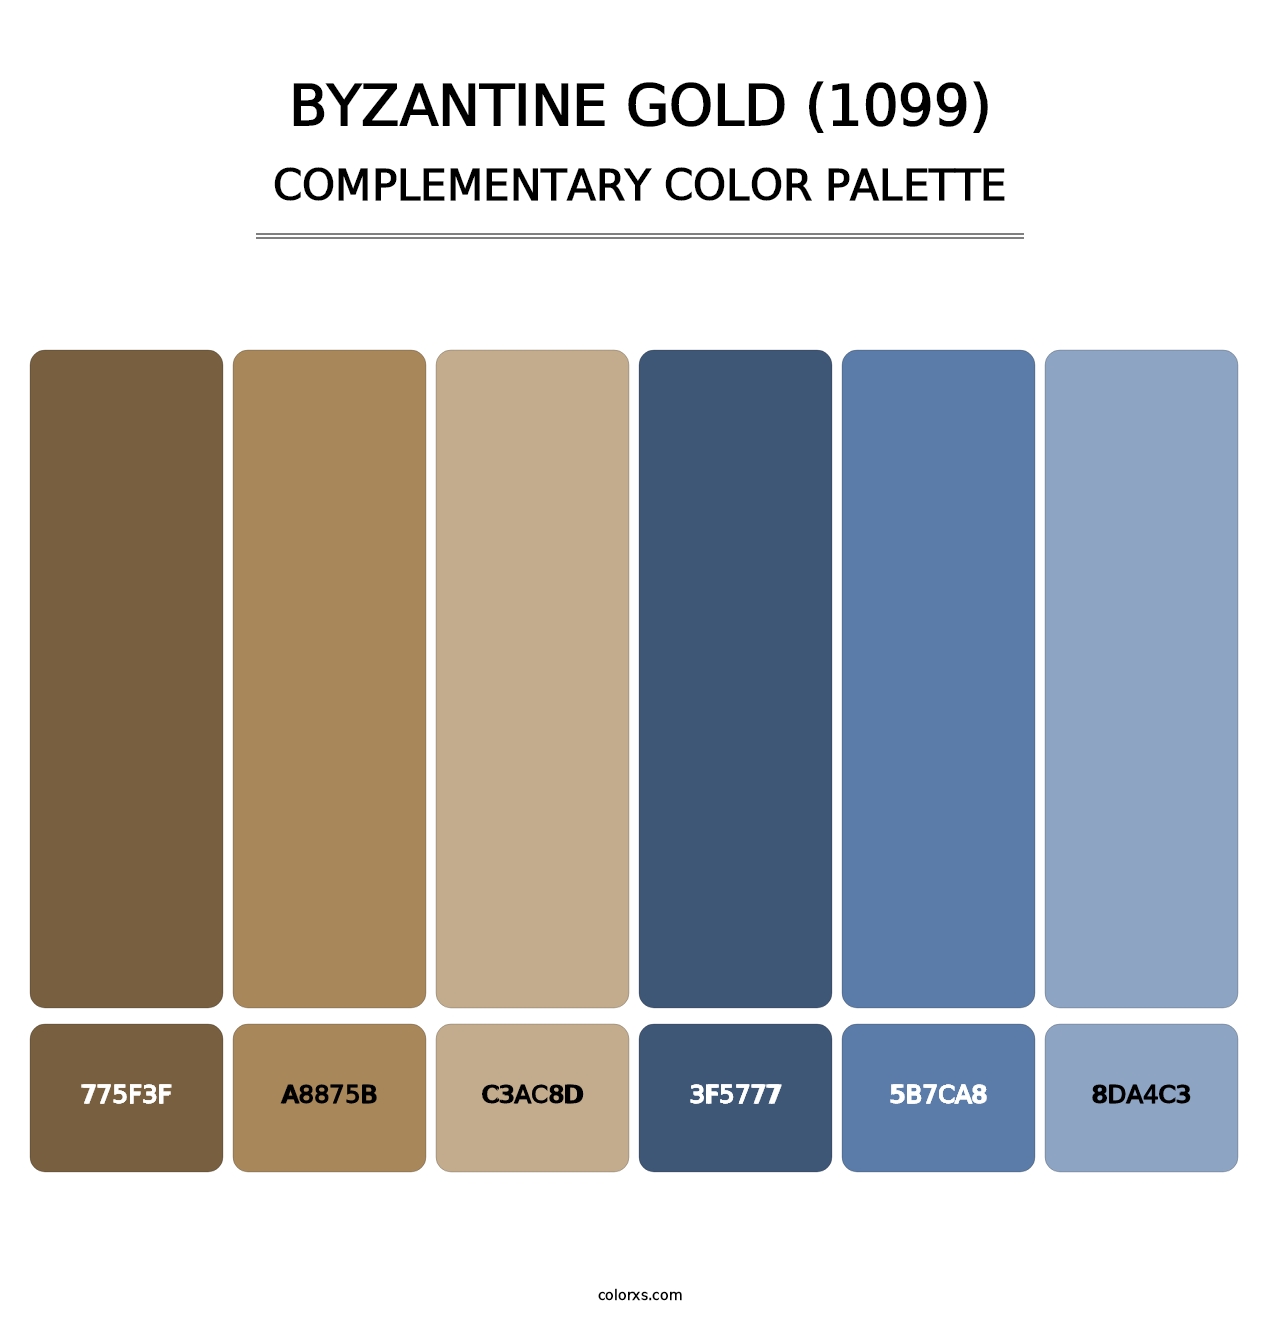 Byzantine Gold (1099) - Complementary Color Palette